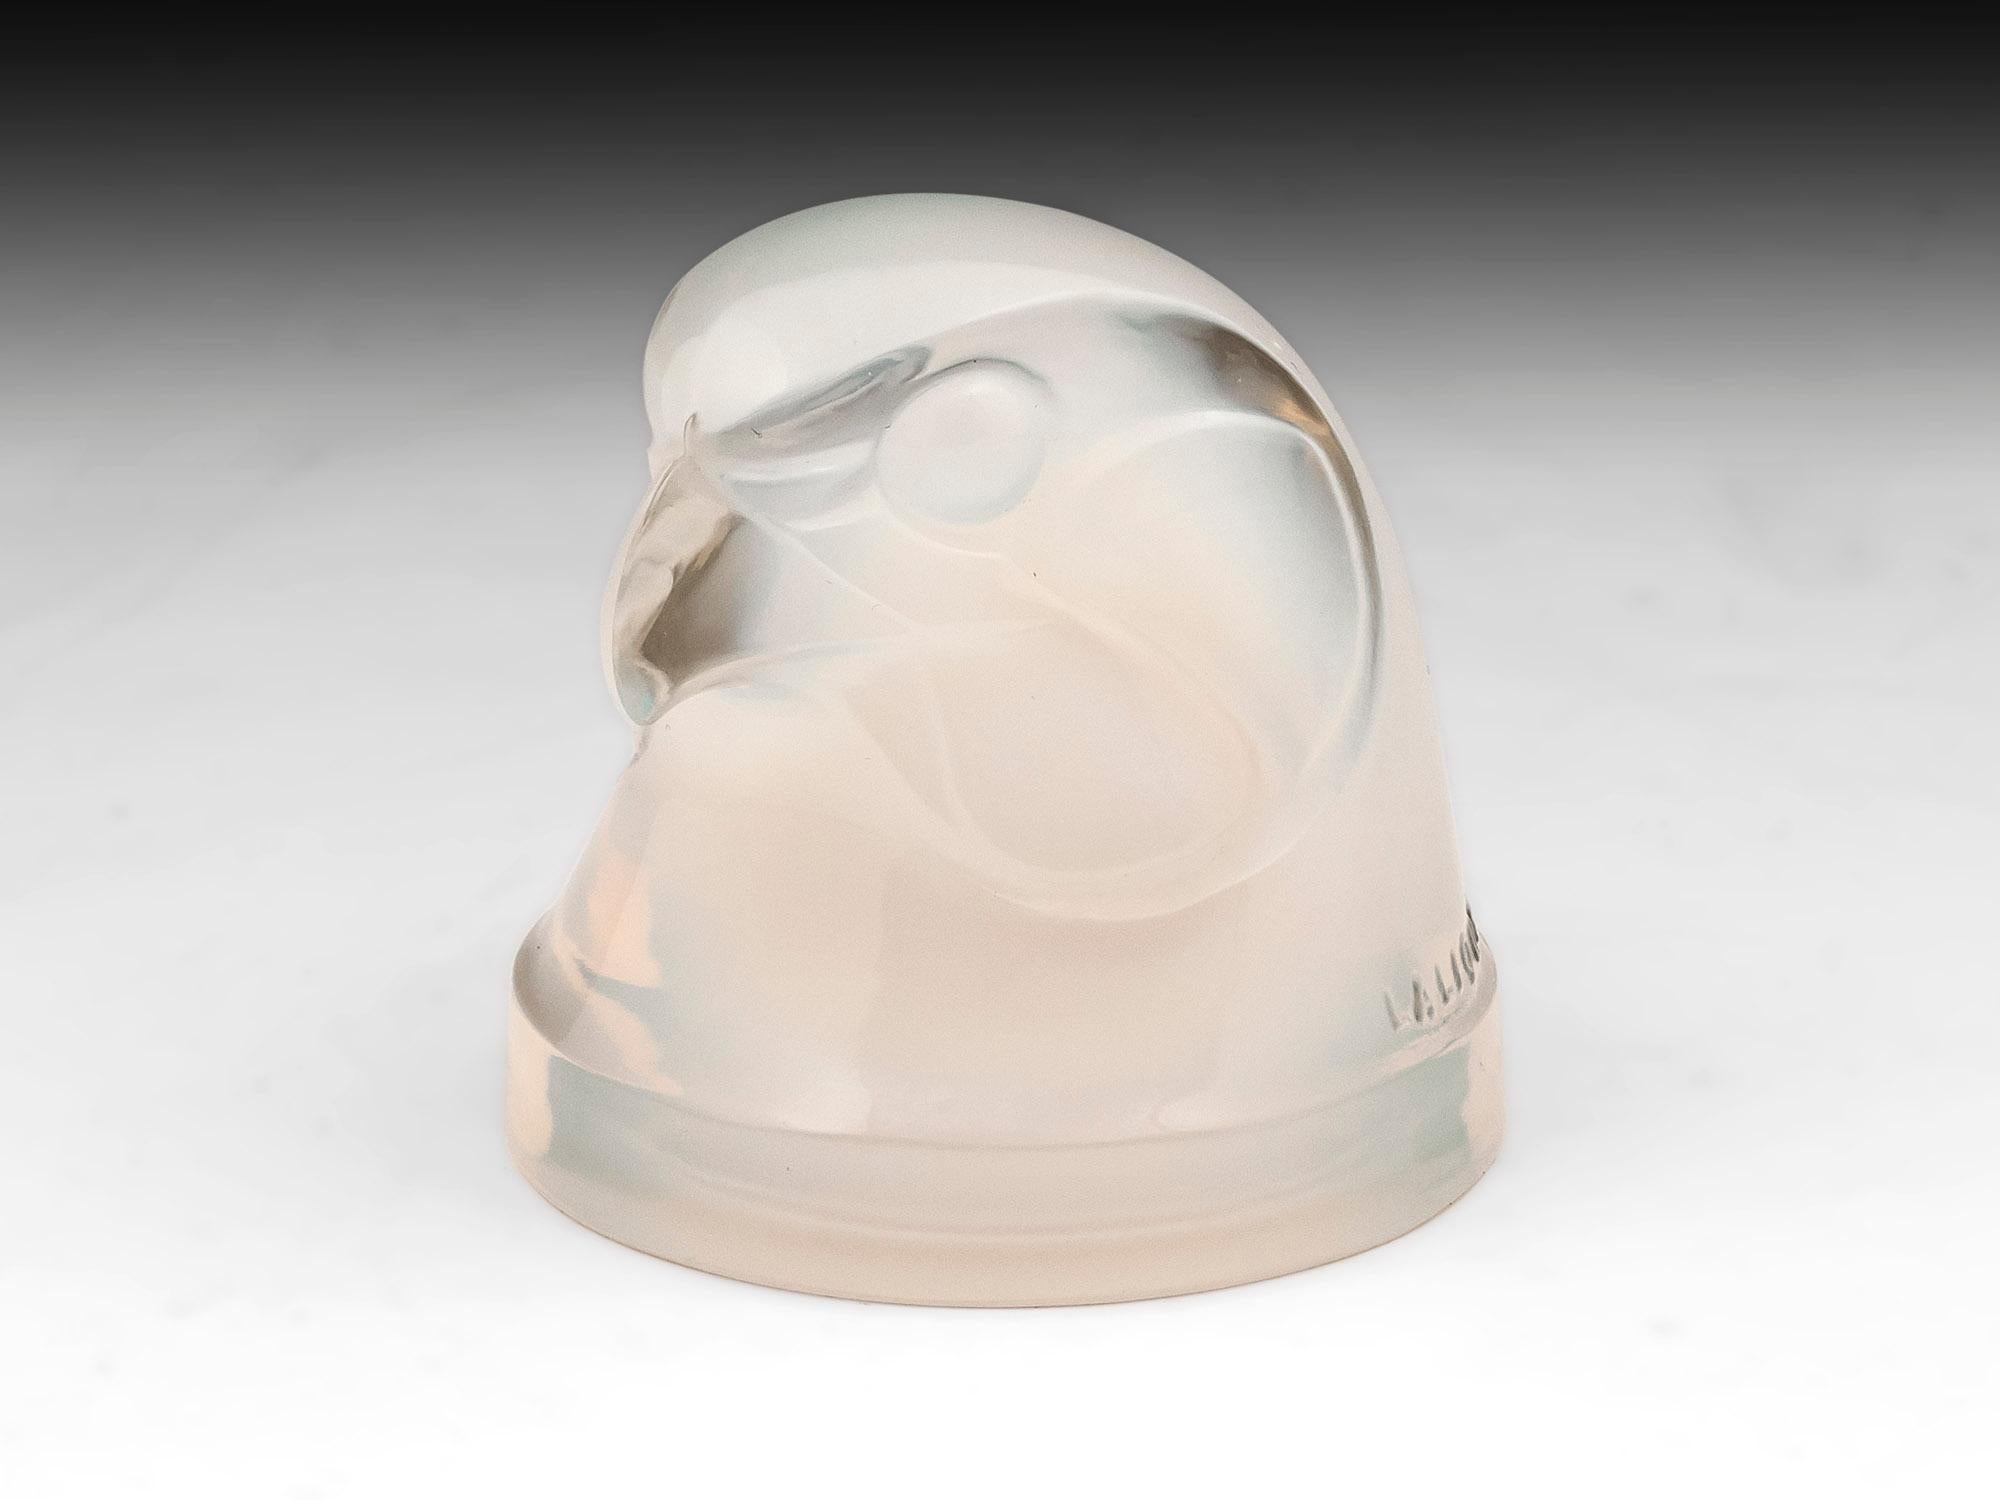 Rene Lalique Tete d’Epervier (hawk’s head) with a wonderful opalescent color.Model number #1139.
Faintly signed with moulded relief “Lalique France” with double tailed “Q” with FRANCE in block capitals on the lower back of the neck.

These